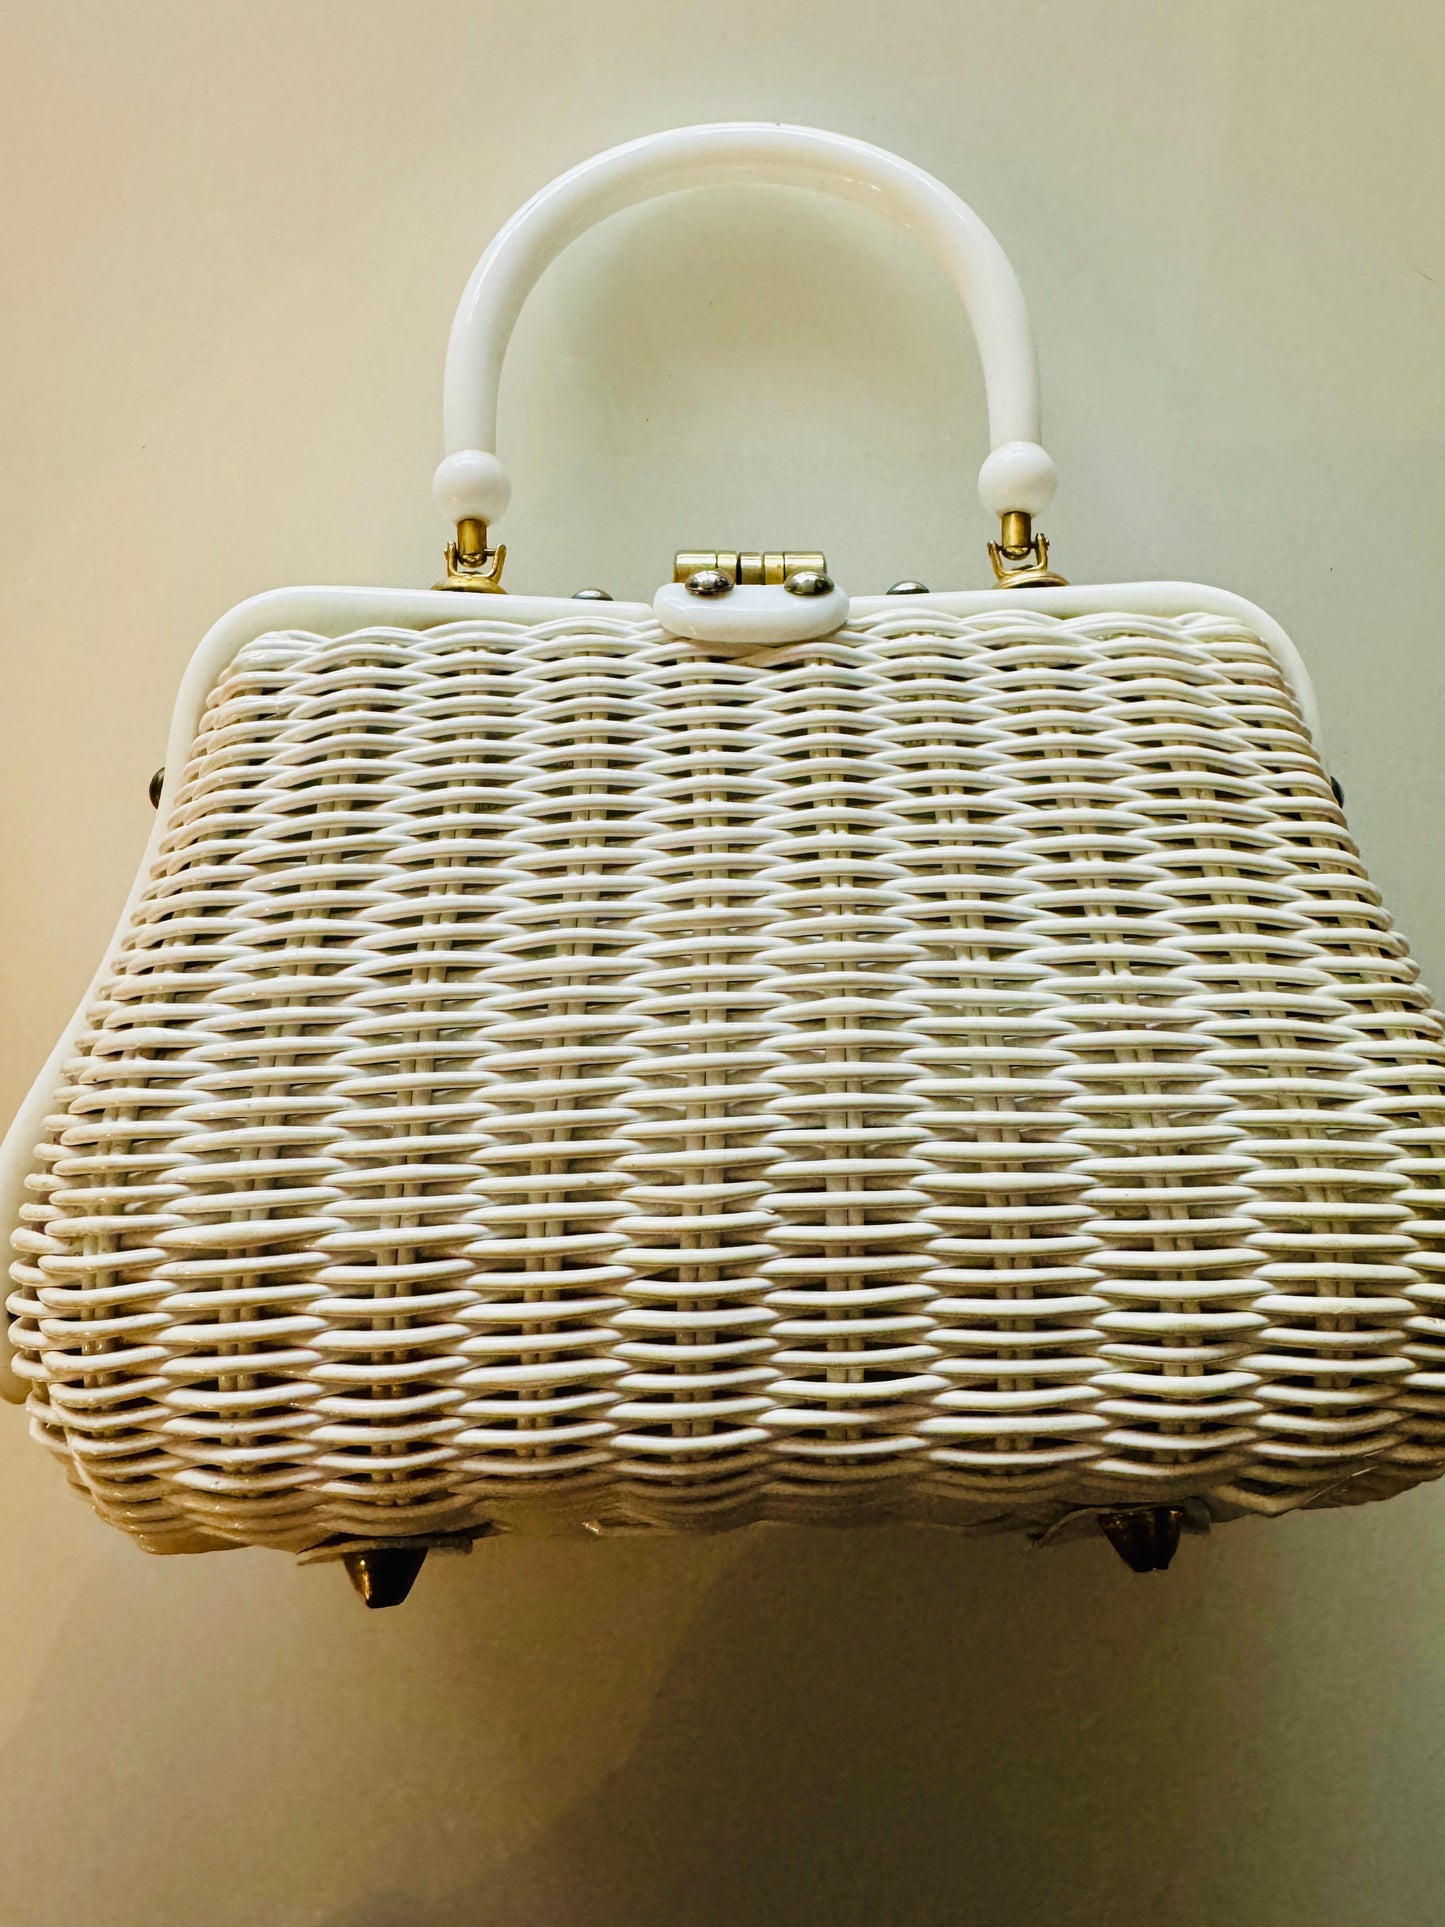 Gorgeous 1950s Adele Original beaded and petit point top handle white wicker bag